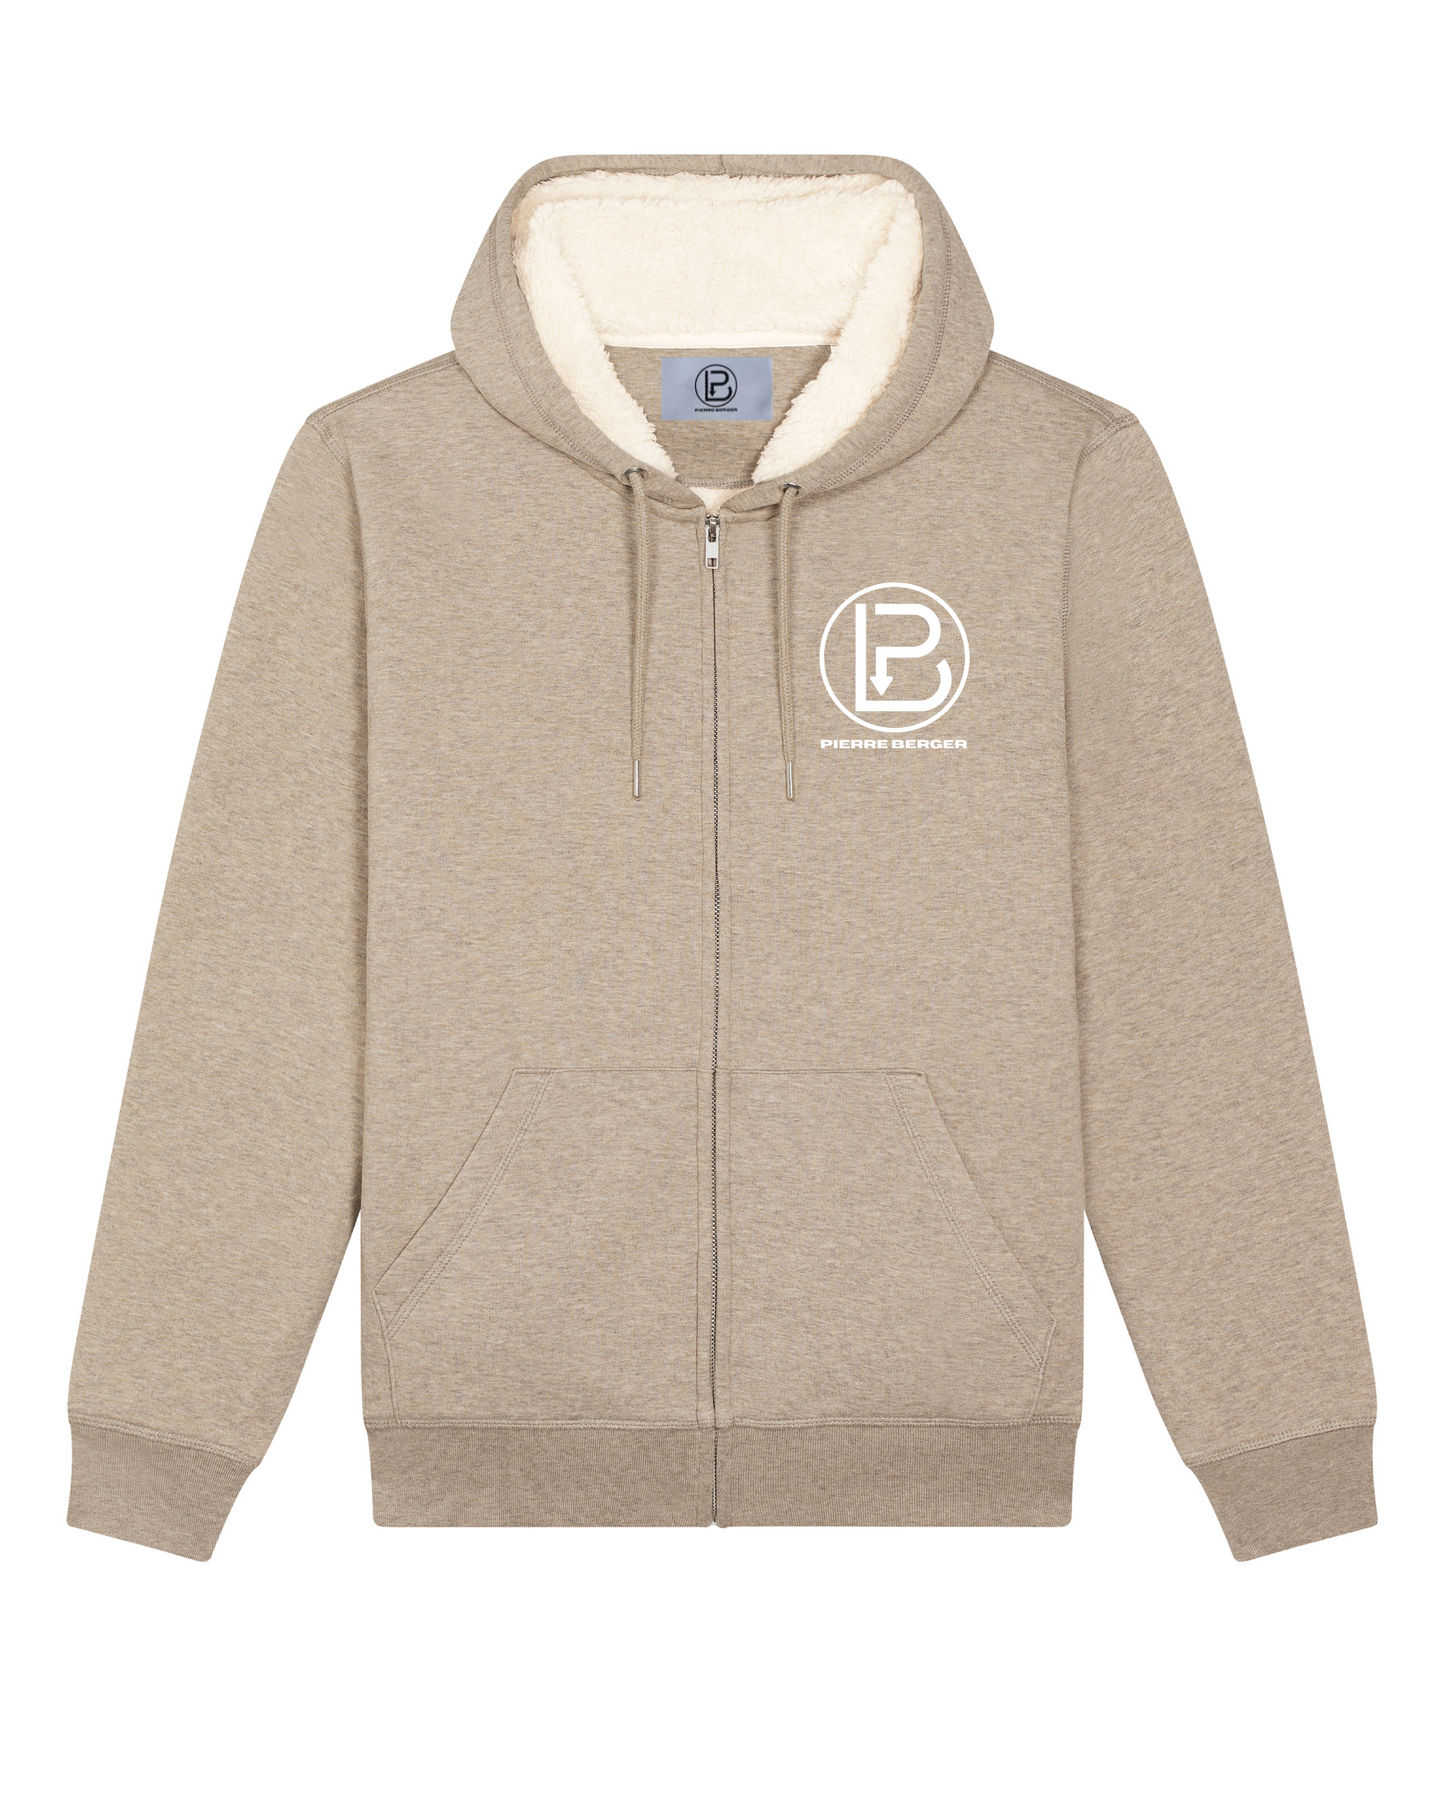 PIERRE BERGER - Unisex zip-up hoodie with Sherpa lining 100% recycled embroidery